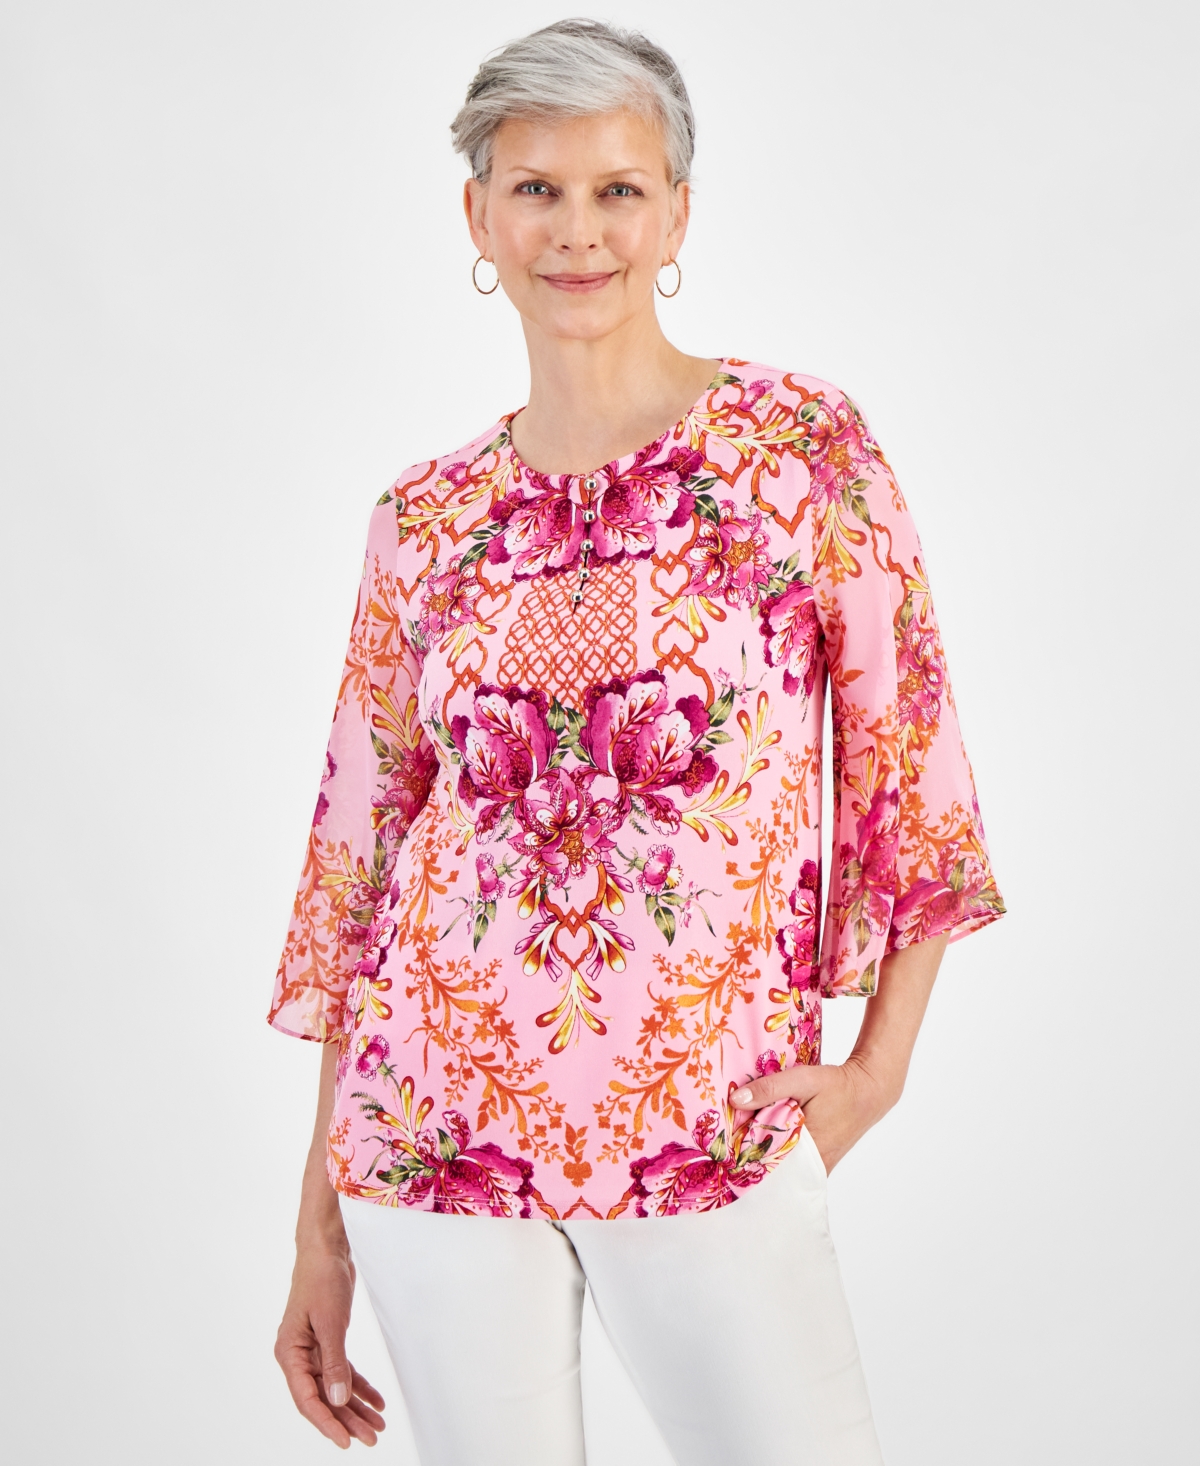 Women's Button-Trim Printed 3/4-Sleeve Top, Created for Macy's - Blossom Berry Combo